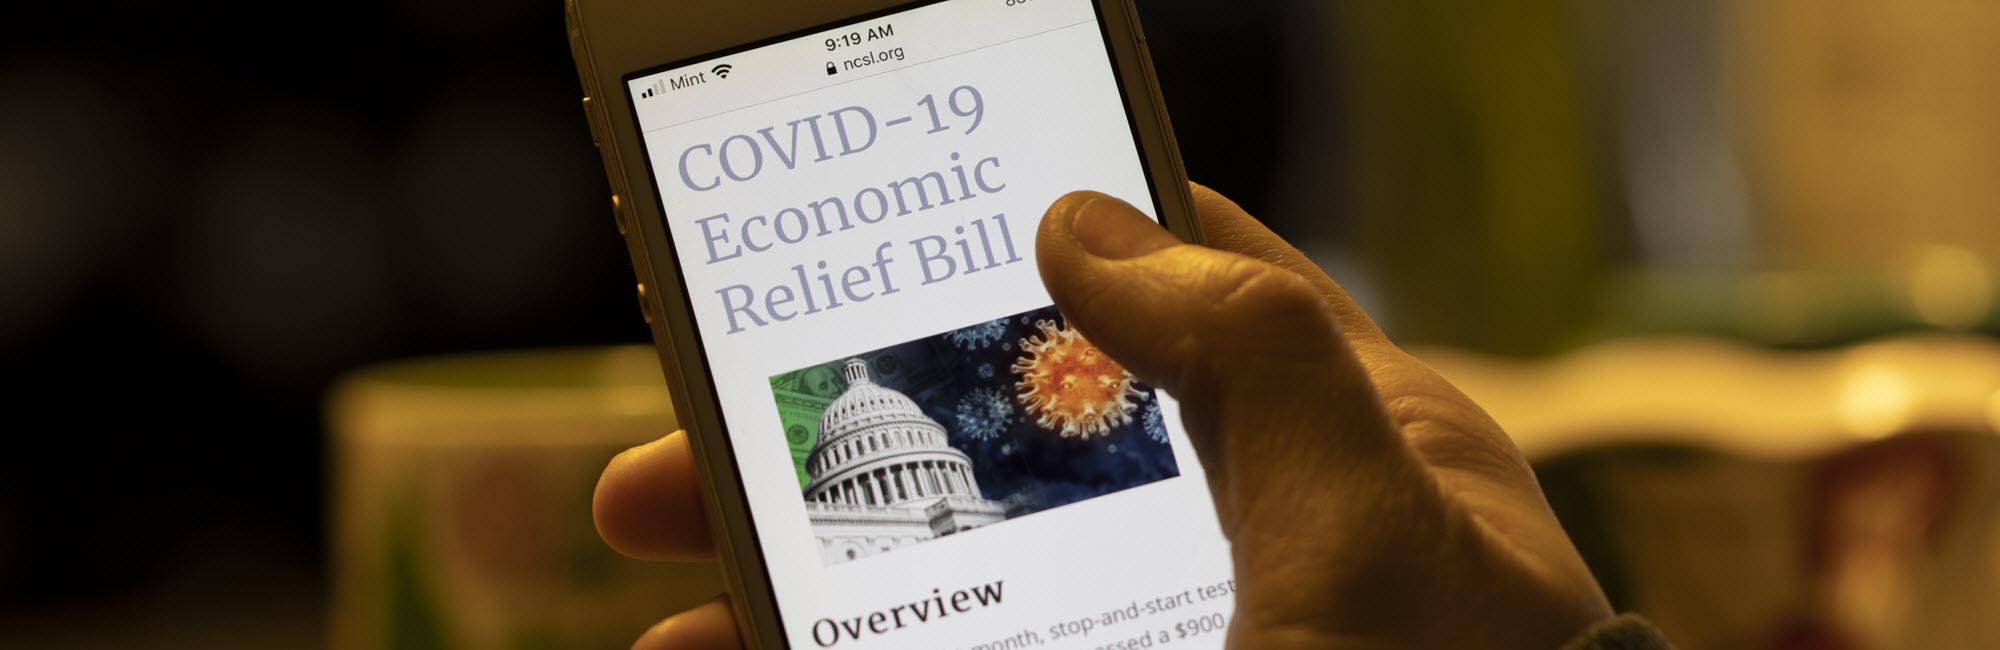 Article about COVID Relief Bill viewed on a smart phone